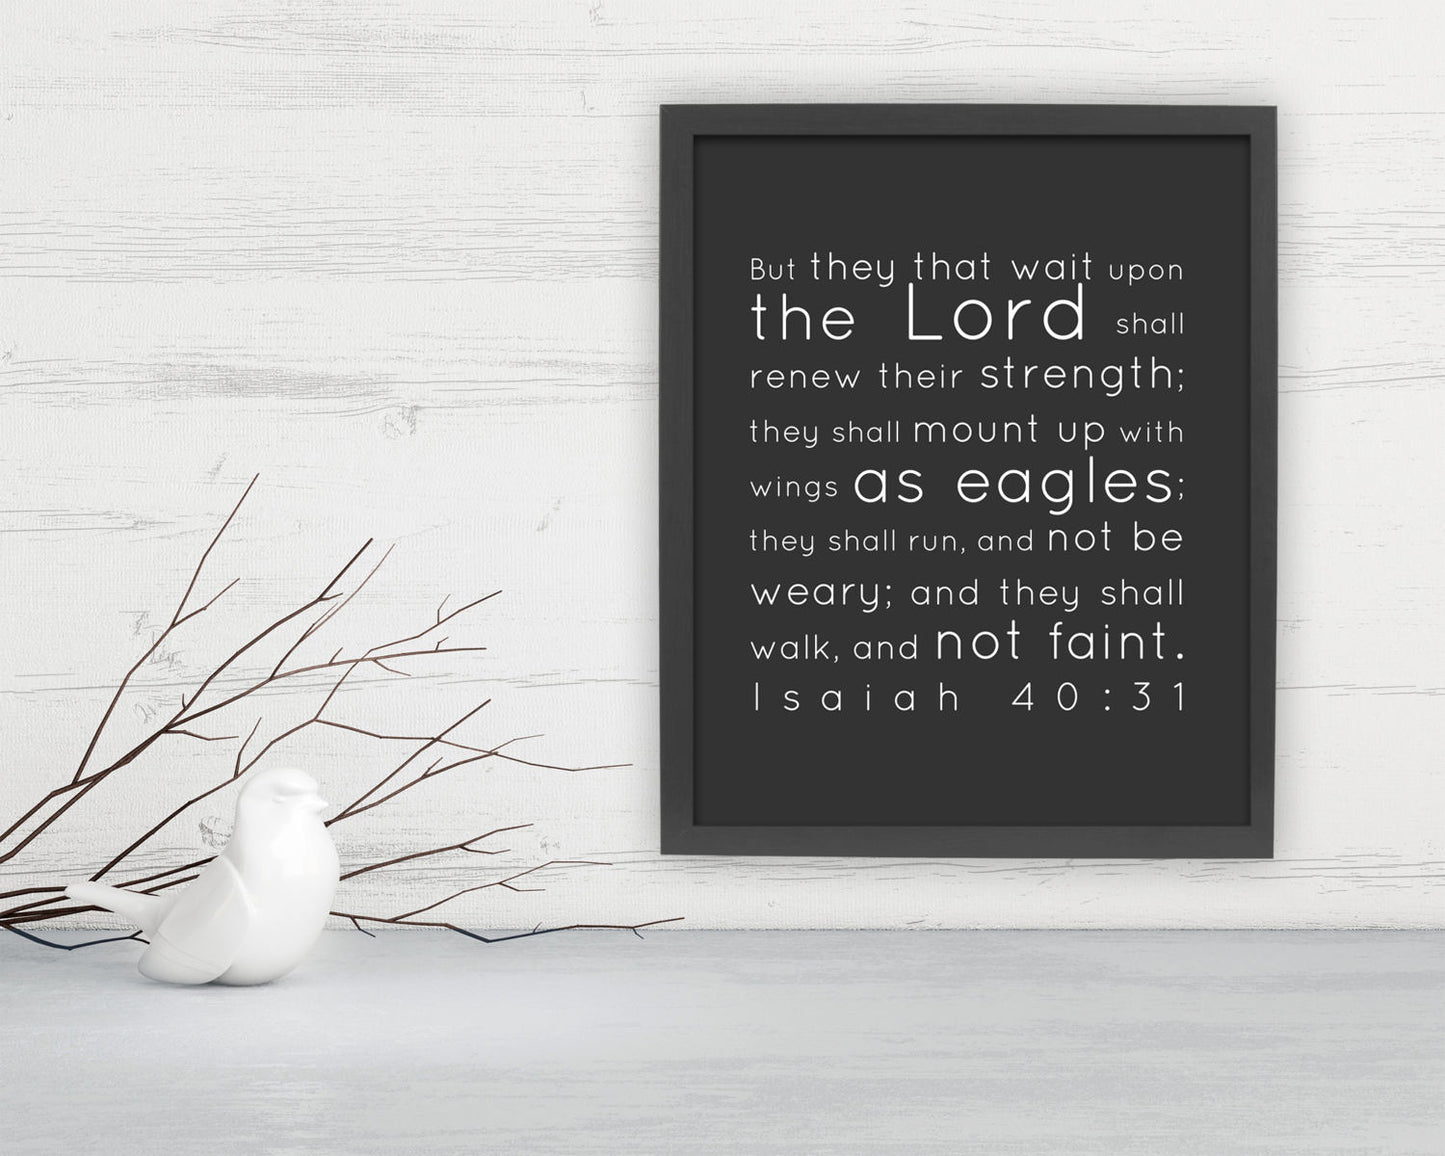 
                  
                    Wait upon the Lord, Framed, Isaiah 40:31, Scripture, Fine art print, Christian, Inspirational, Gift; Faith, Eagles, Wings
                  
                